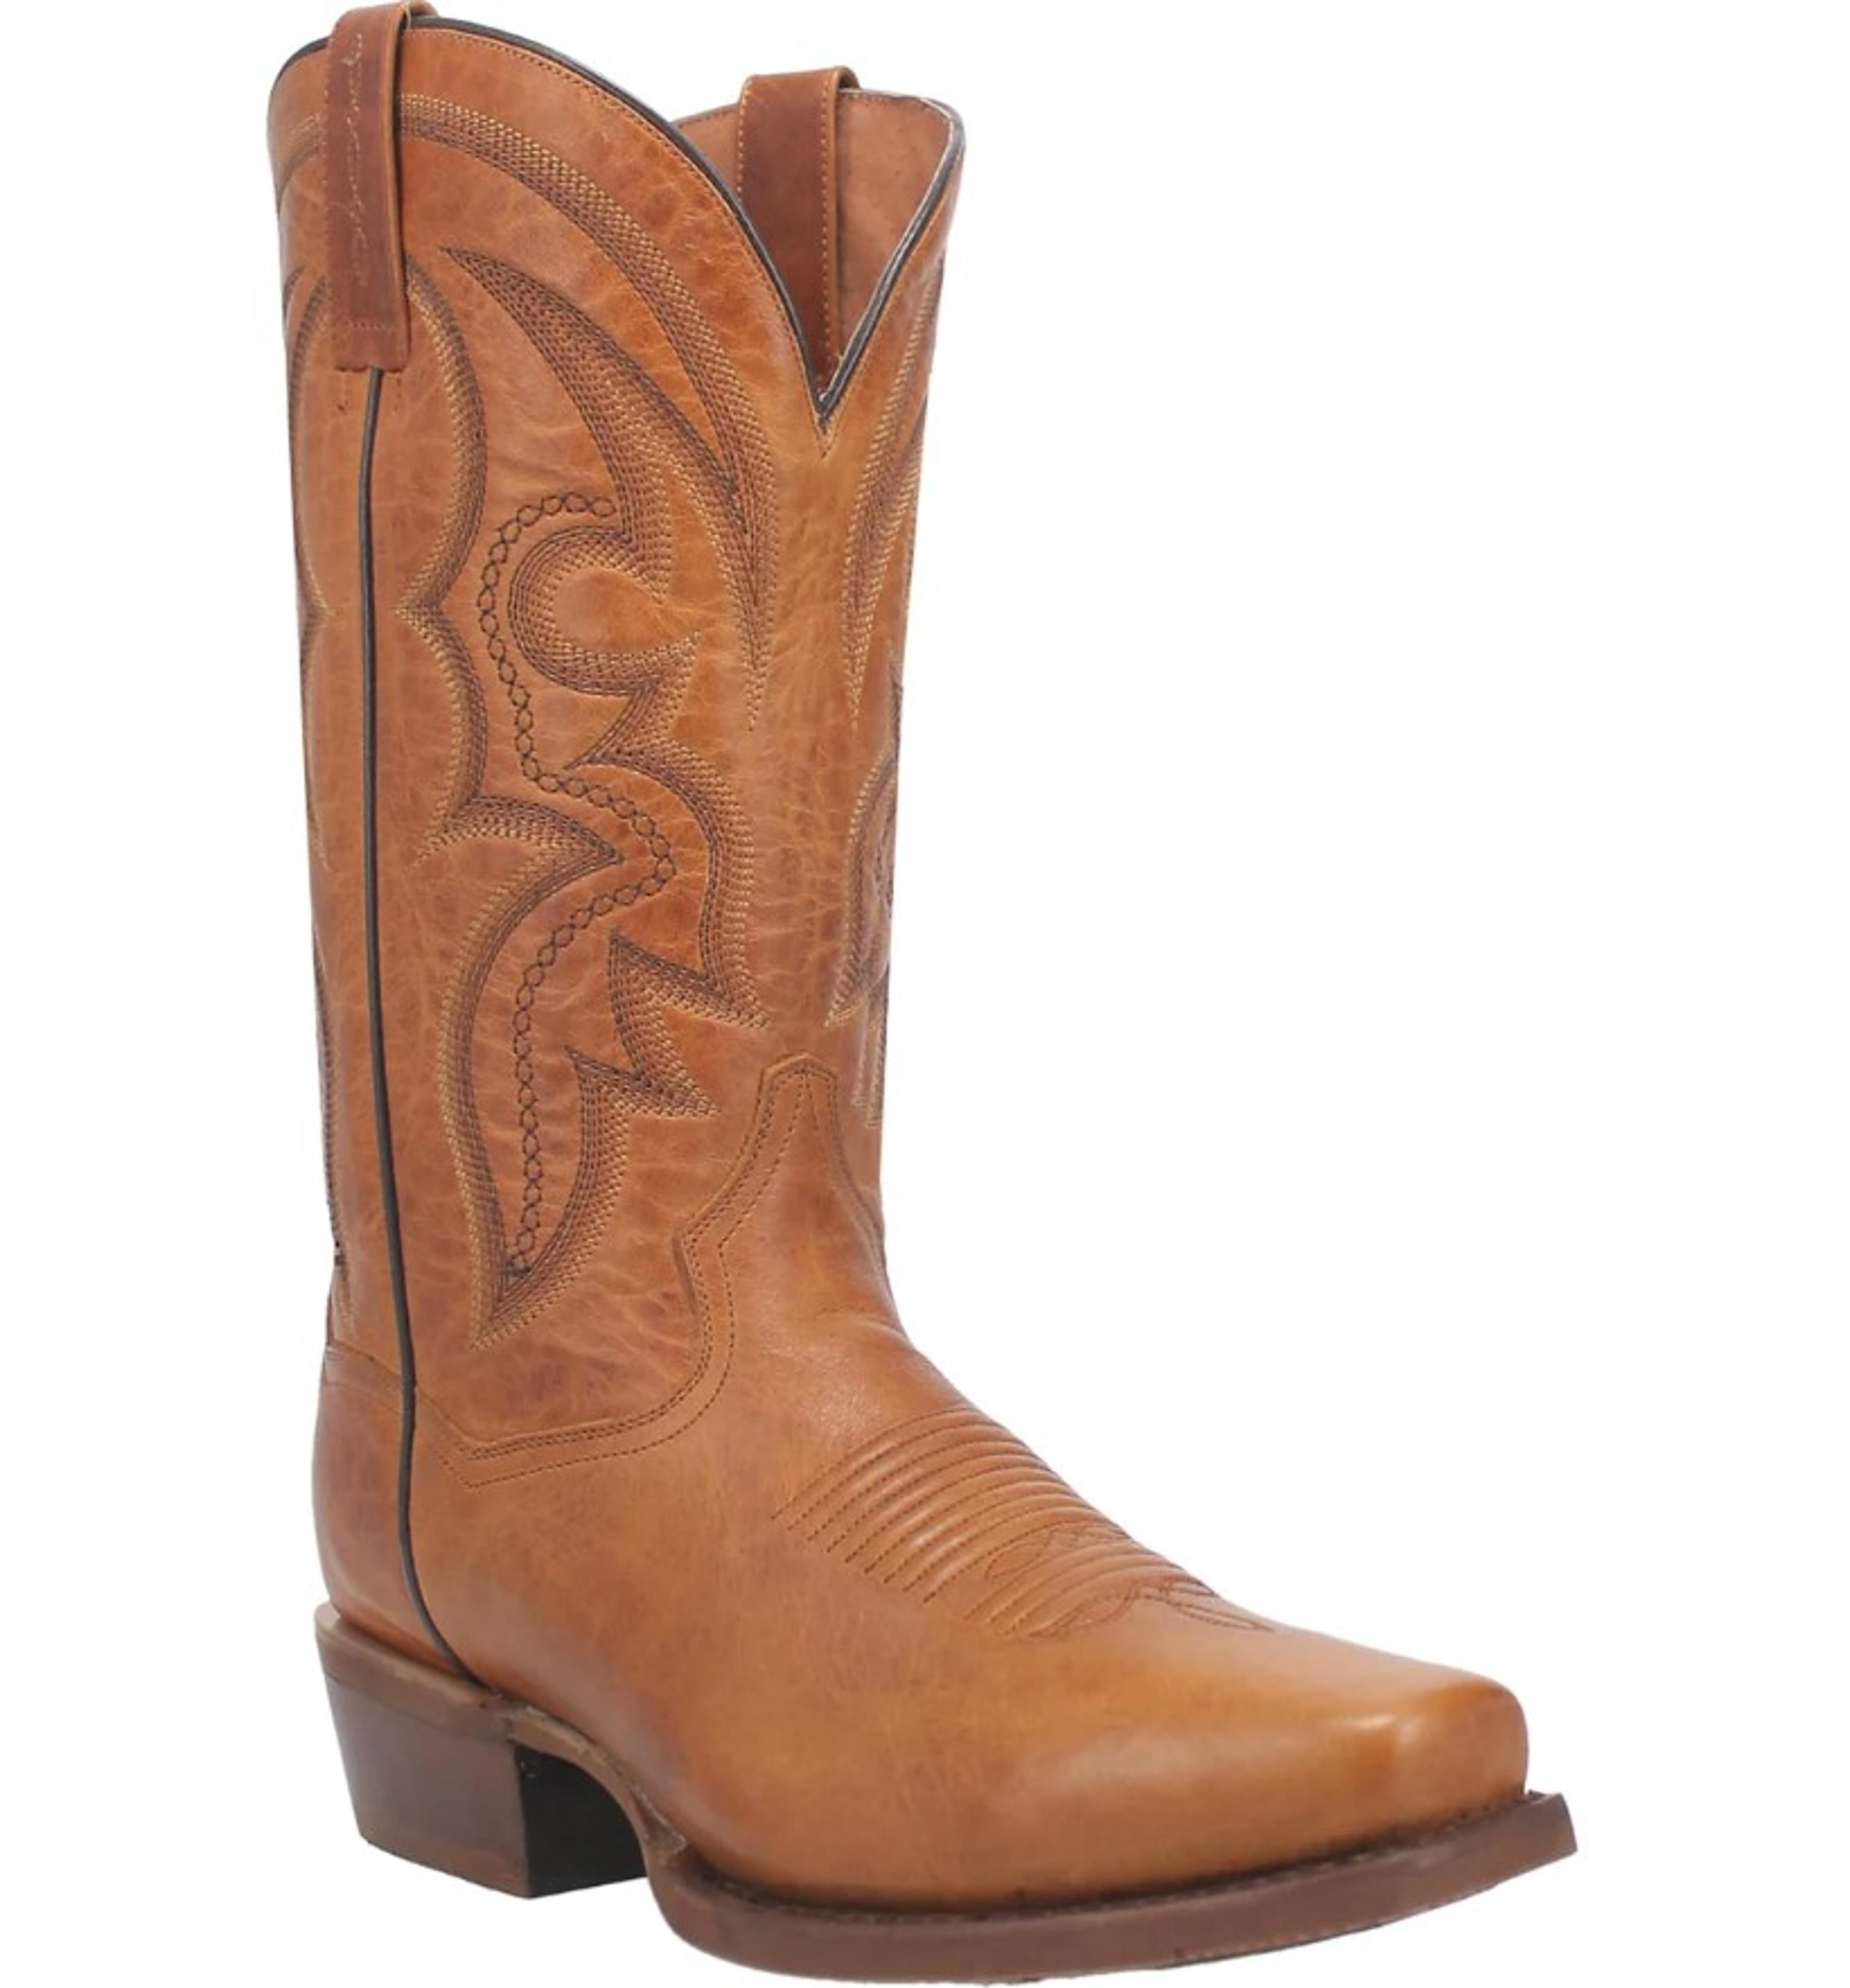  Wagner Western Boots